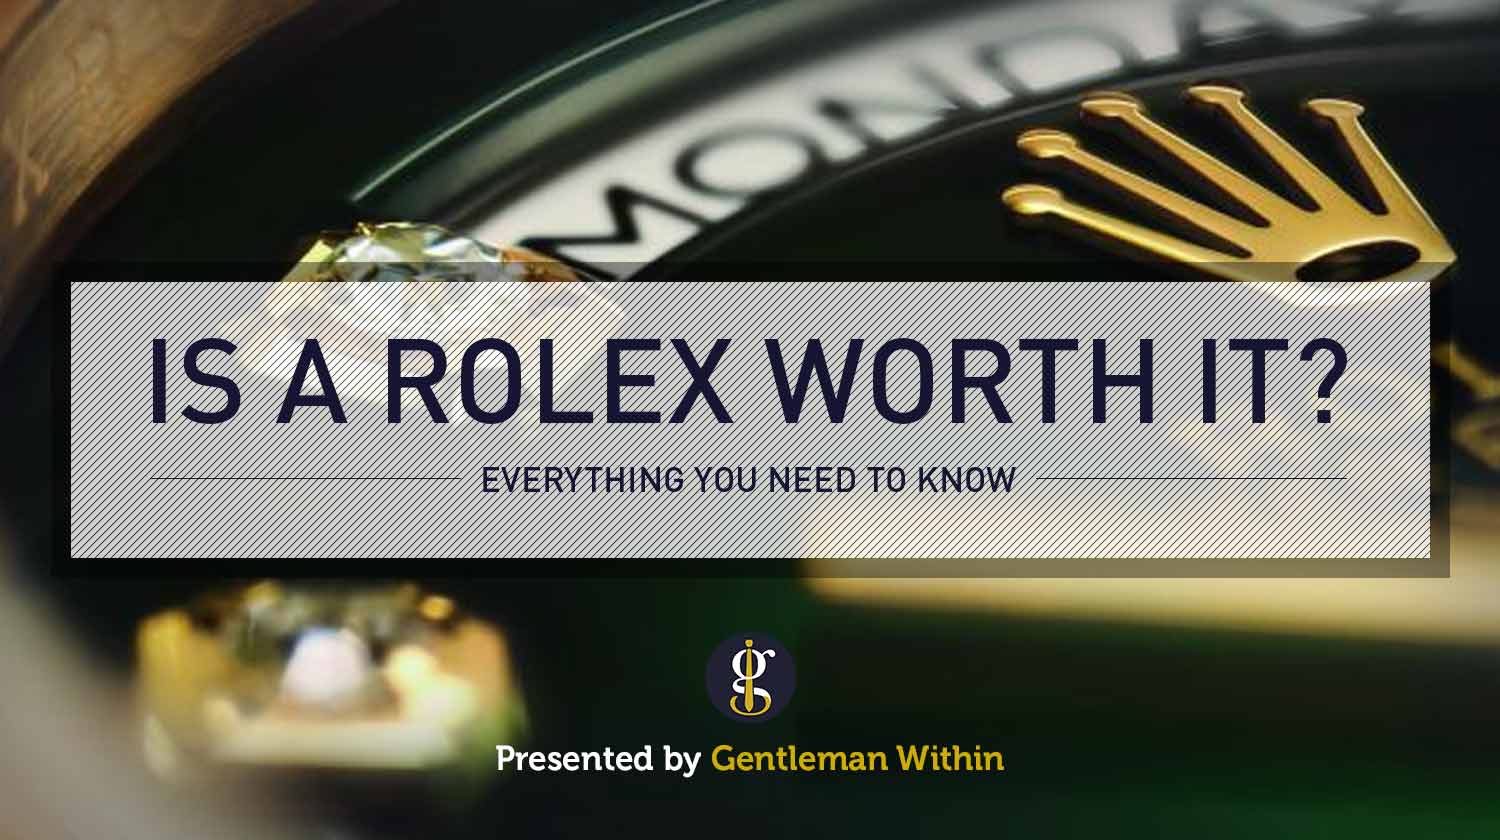 Is A Rolex Worth It? Everything You Need To Know | GENTLEMAN WITHIN